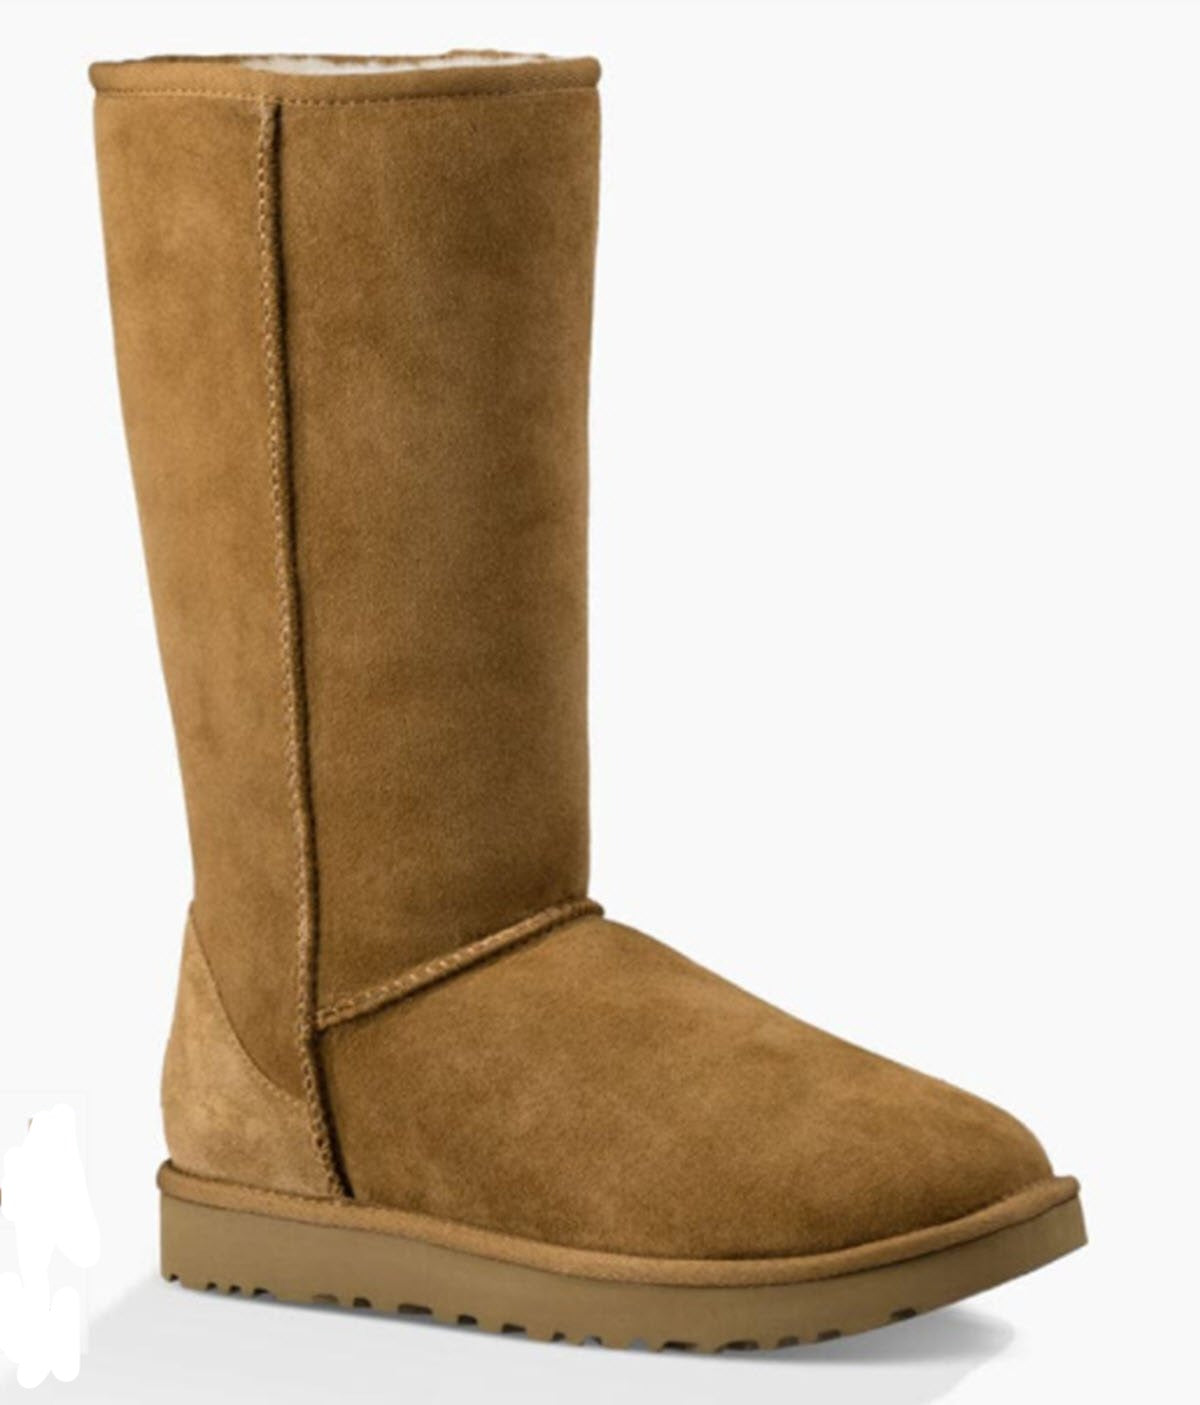 The Ugg Classic Tall Boot in Chestnut